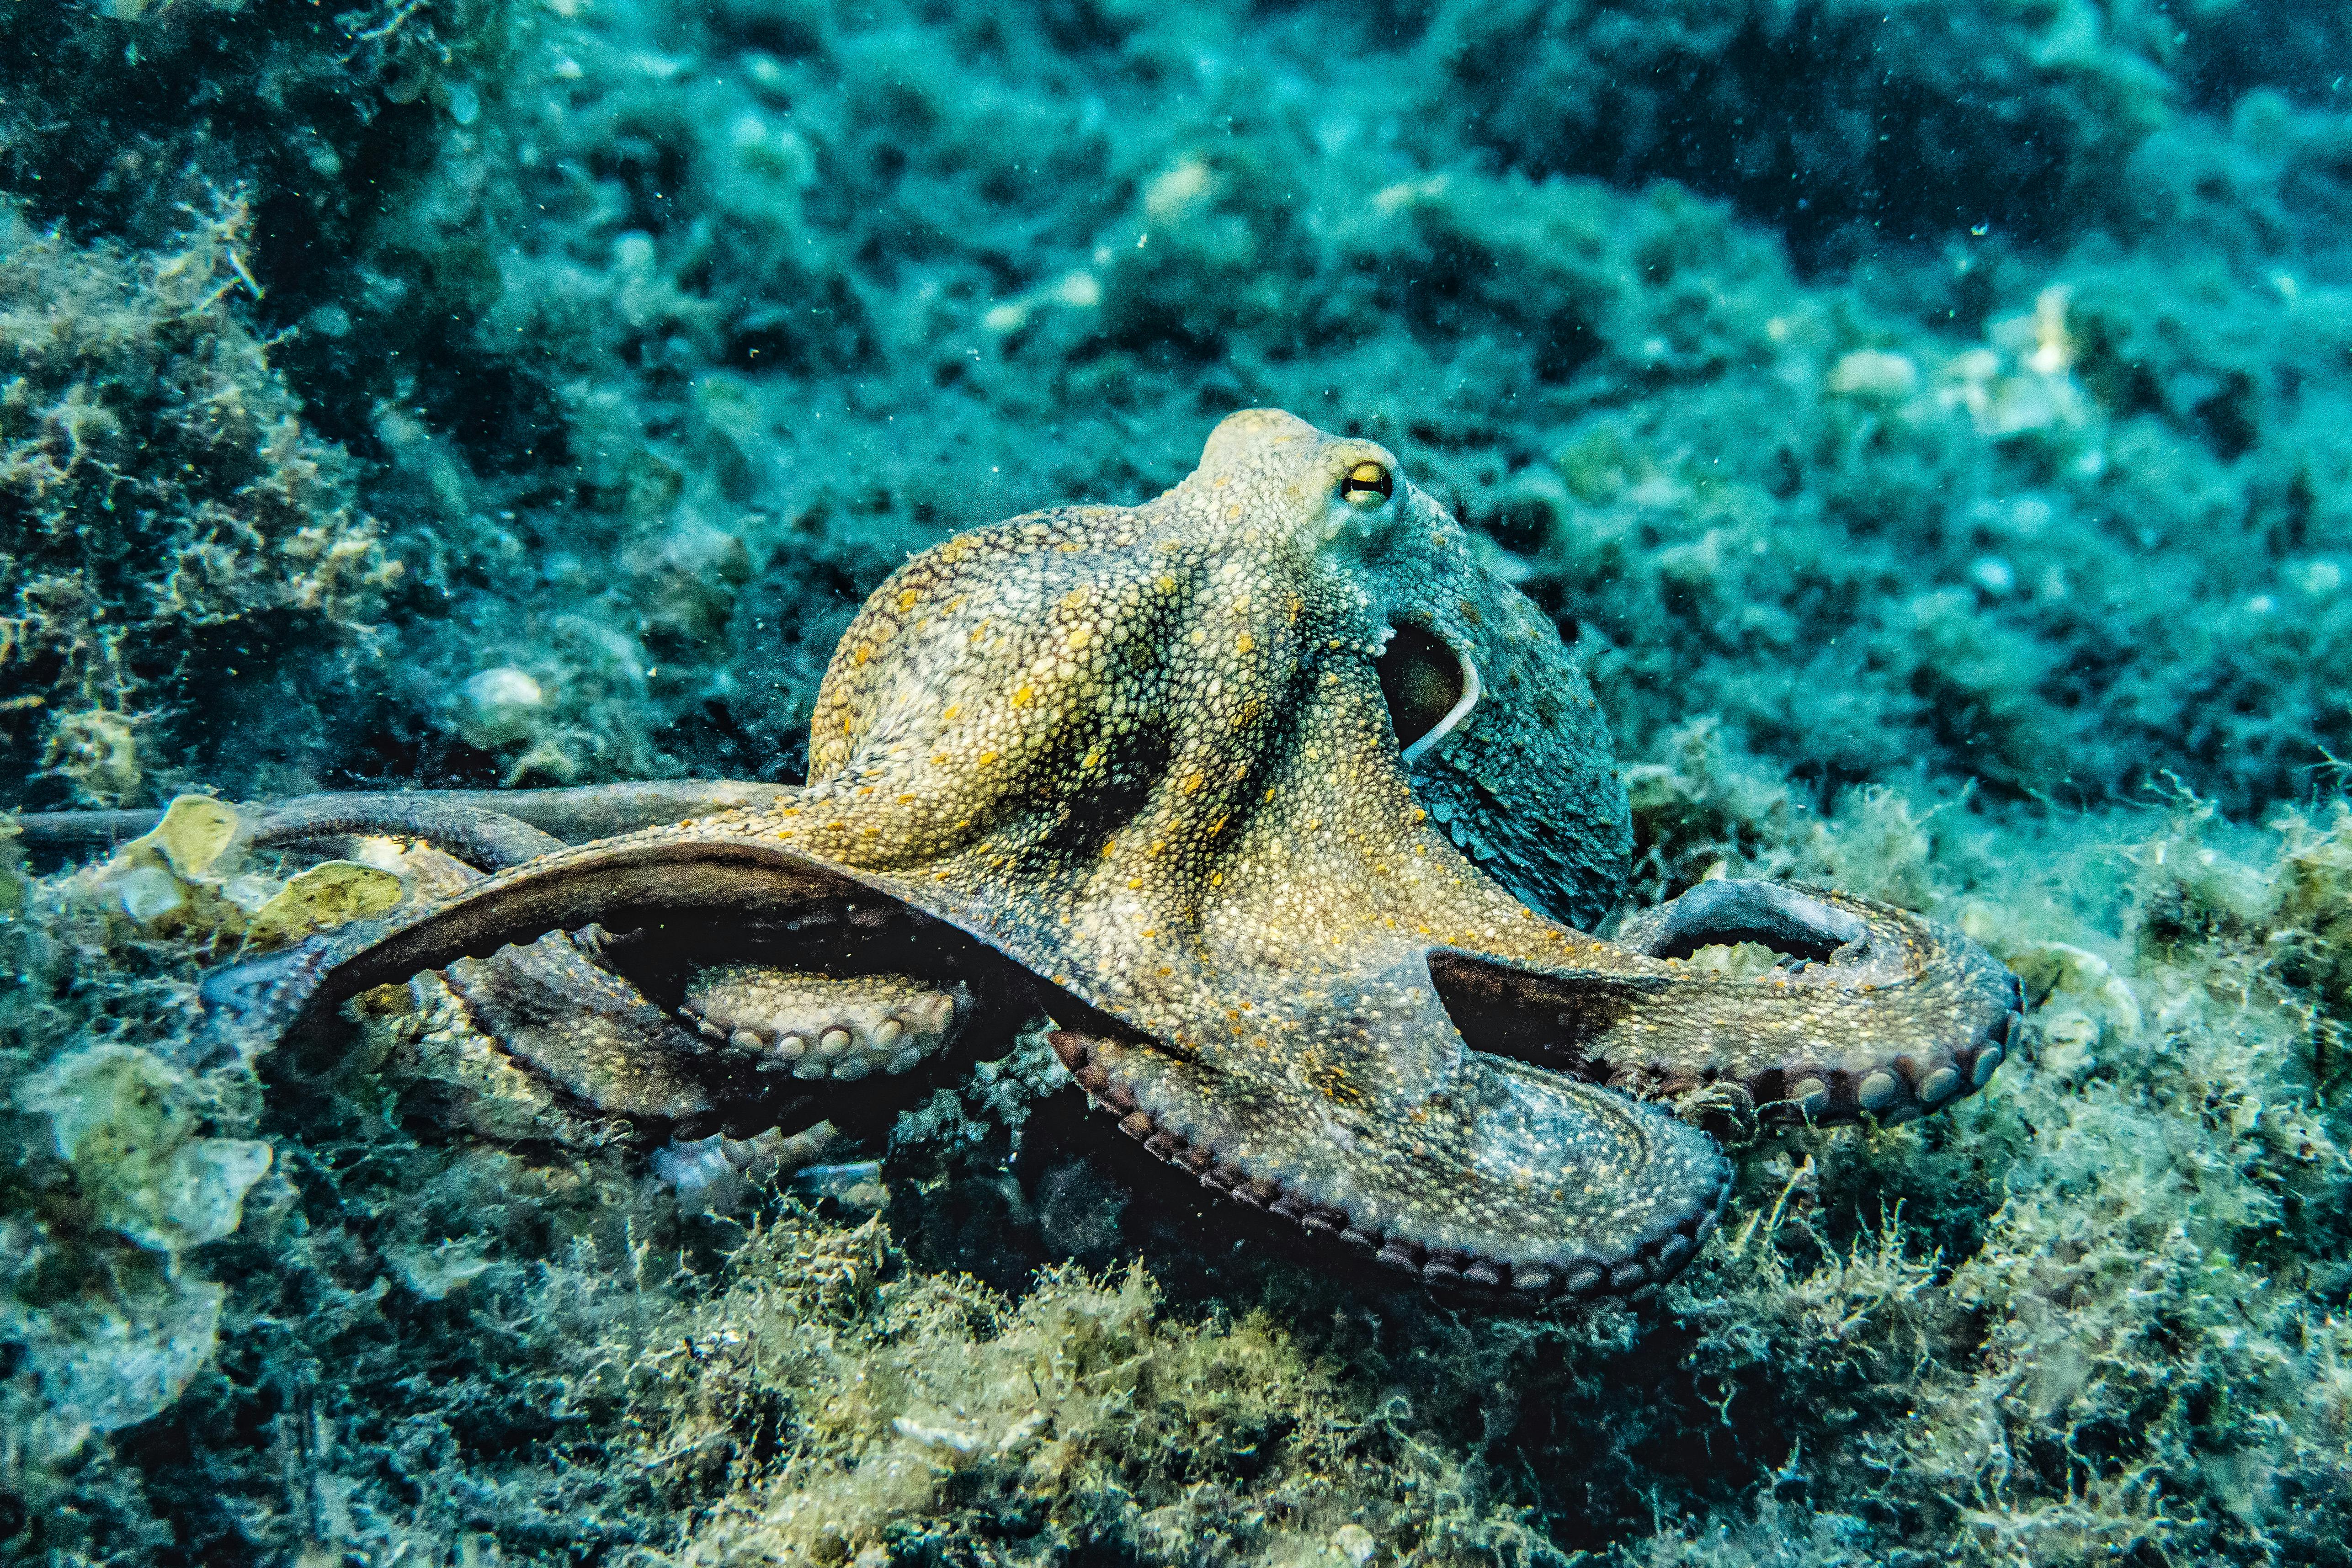 An octopus under the sea. | Photo: Pexels